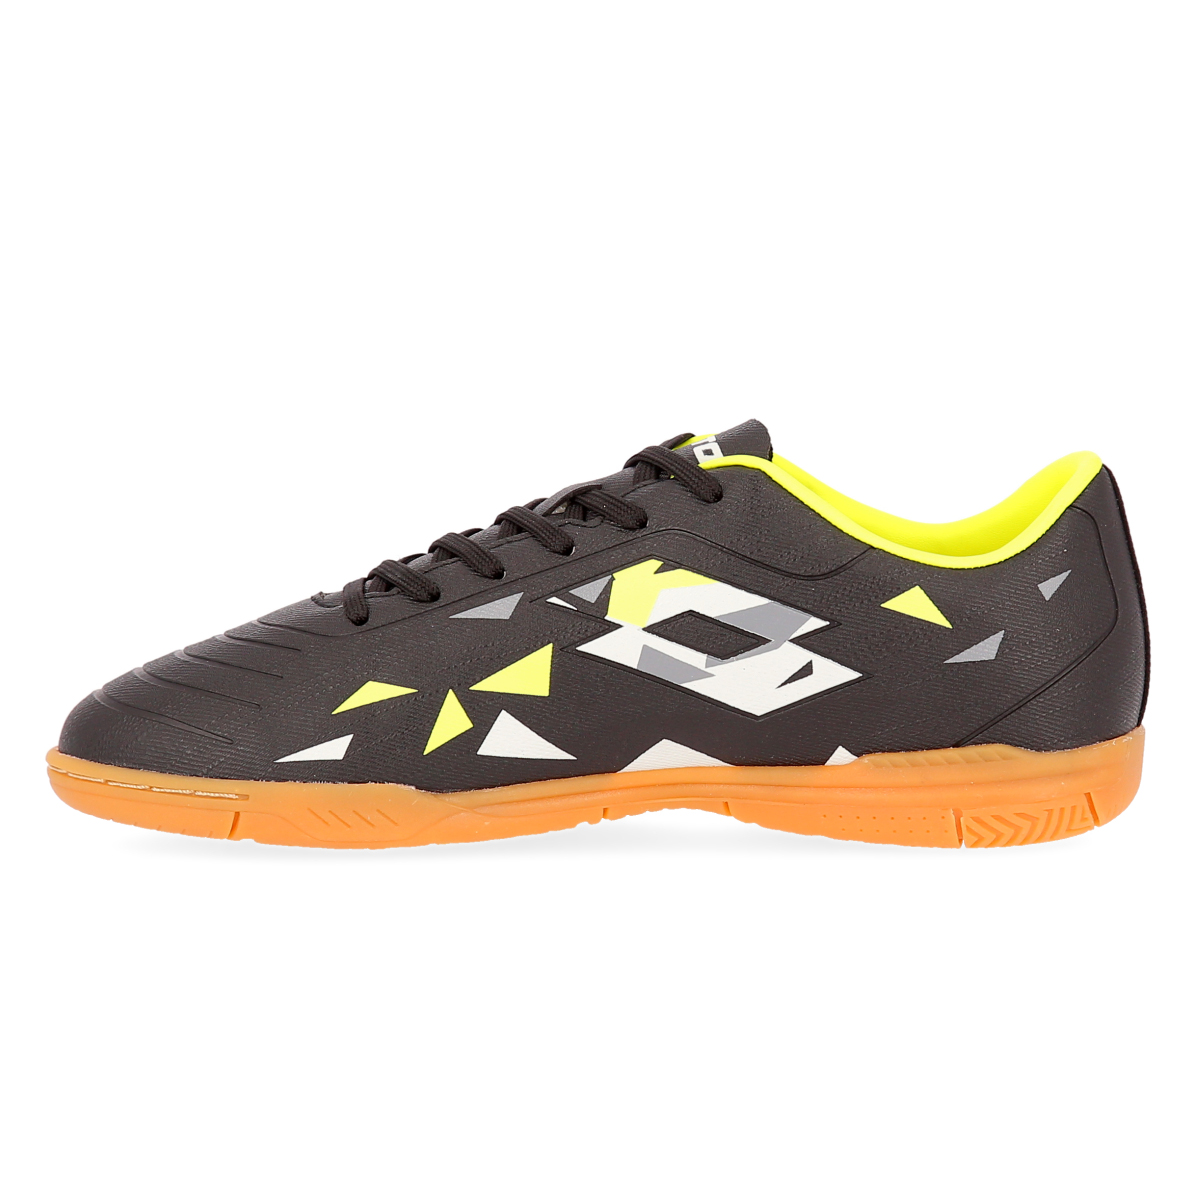 Botines Fútbol Lotto Solista 700 V Id Hombre,  image number null